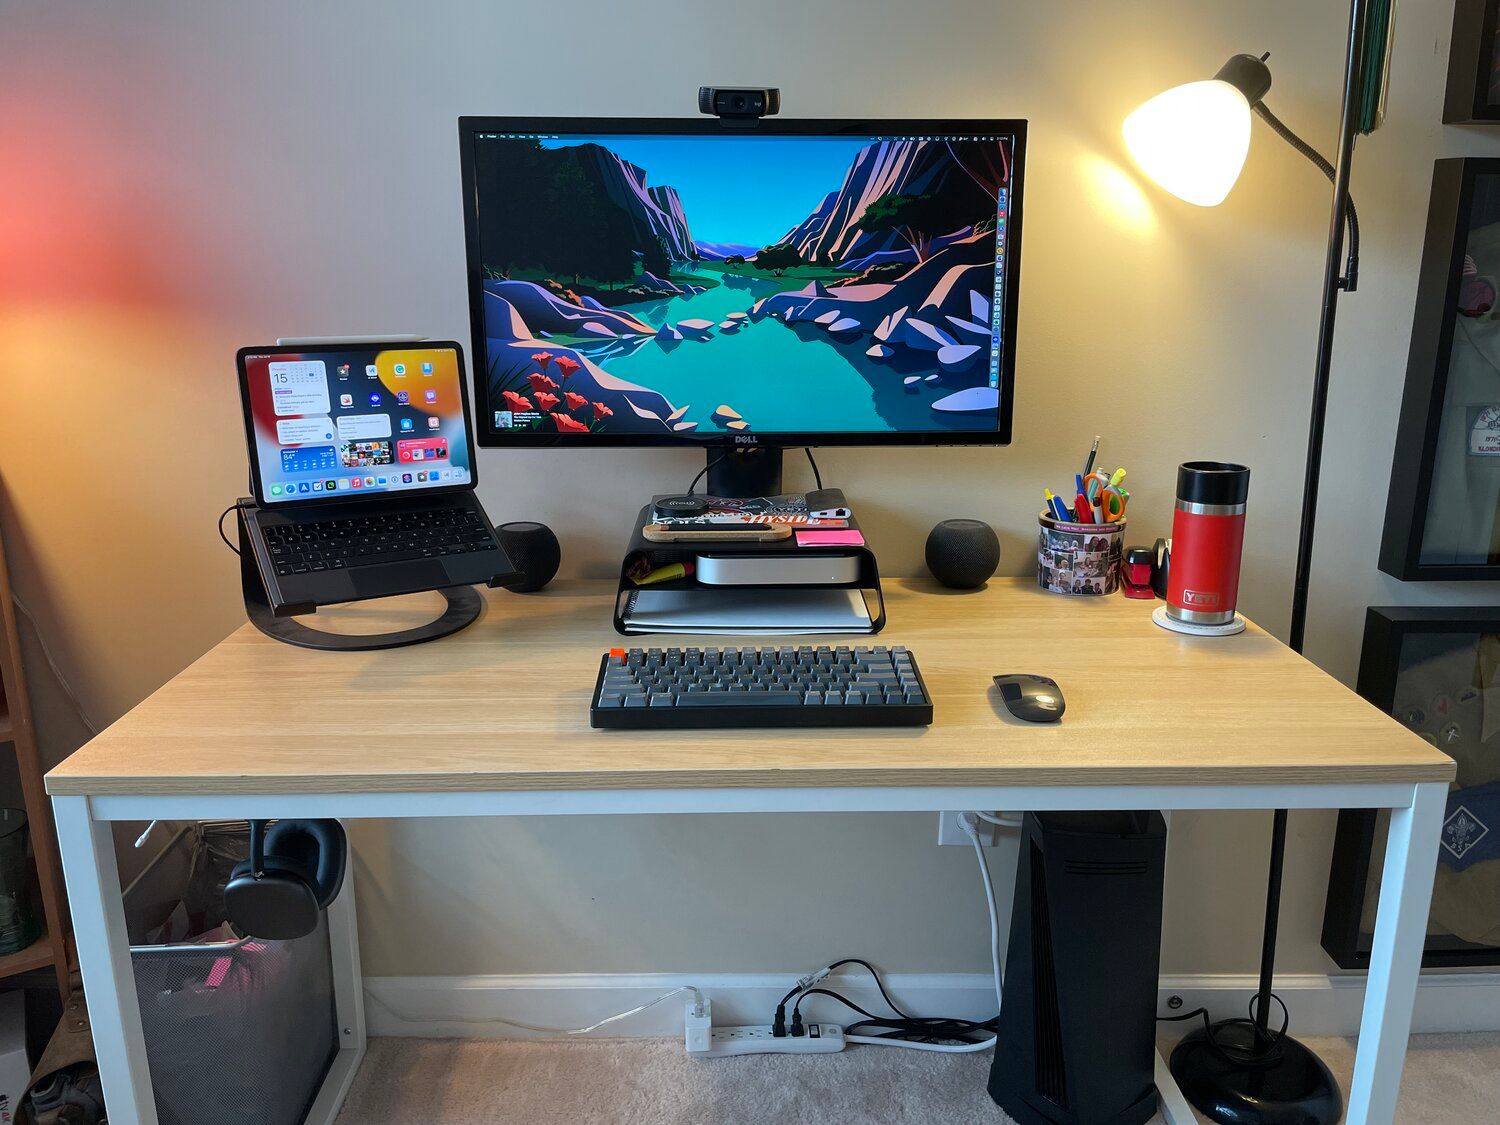 A view of my desk with computer and monitor from the front.